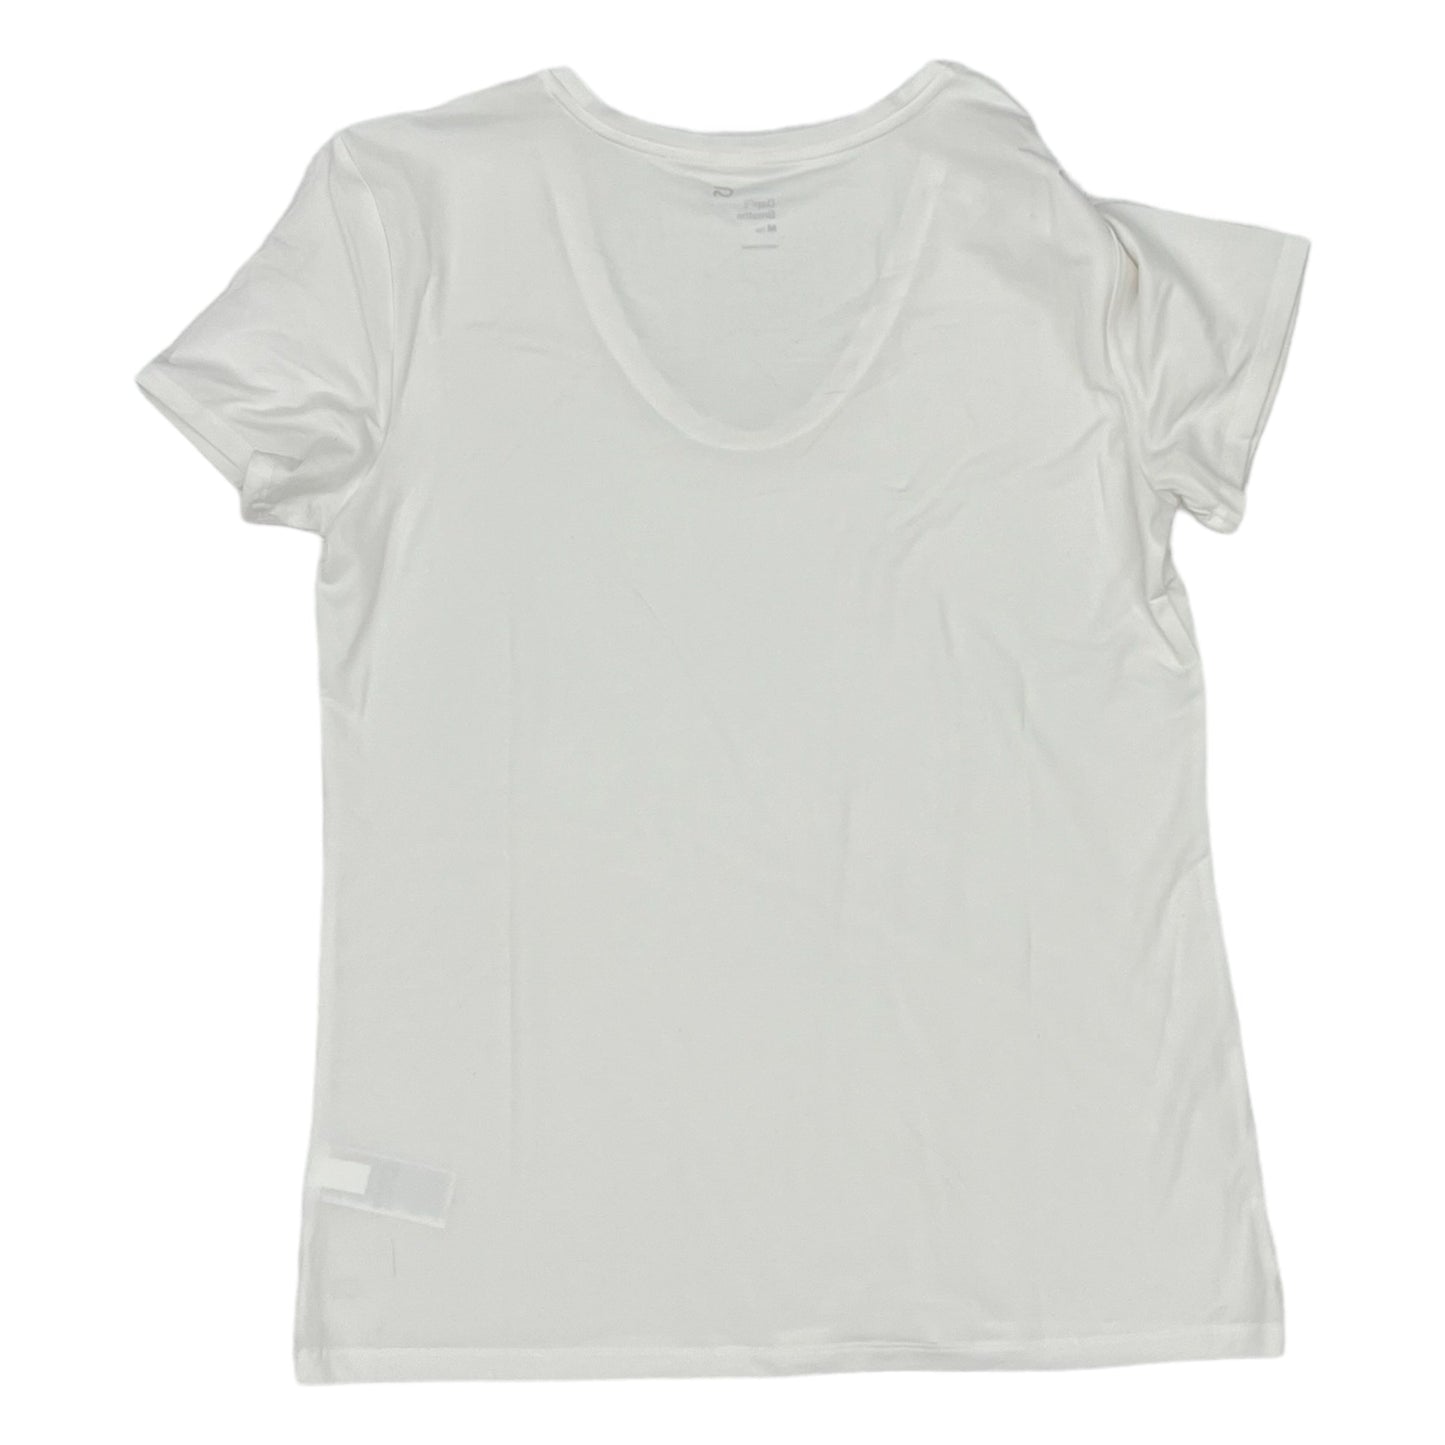 Athletic Top Short Sleeve By Gapfit  Size: M